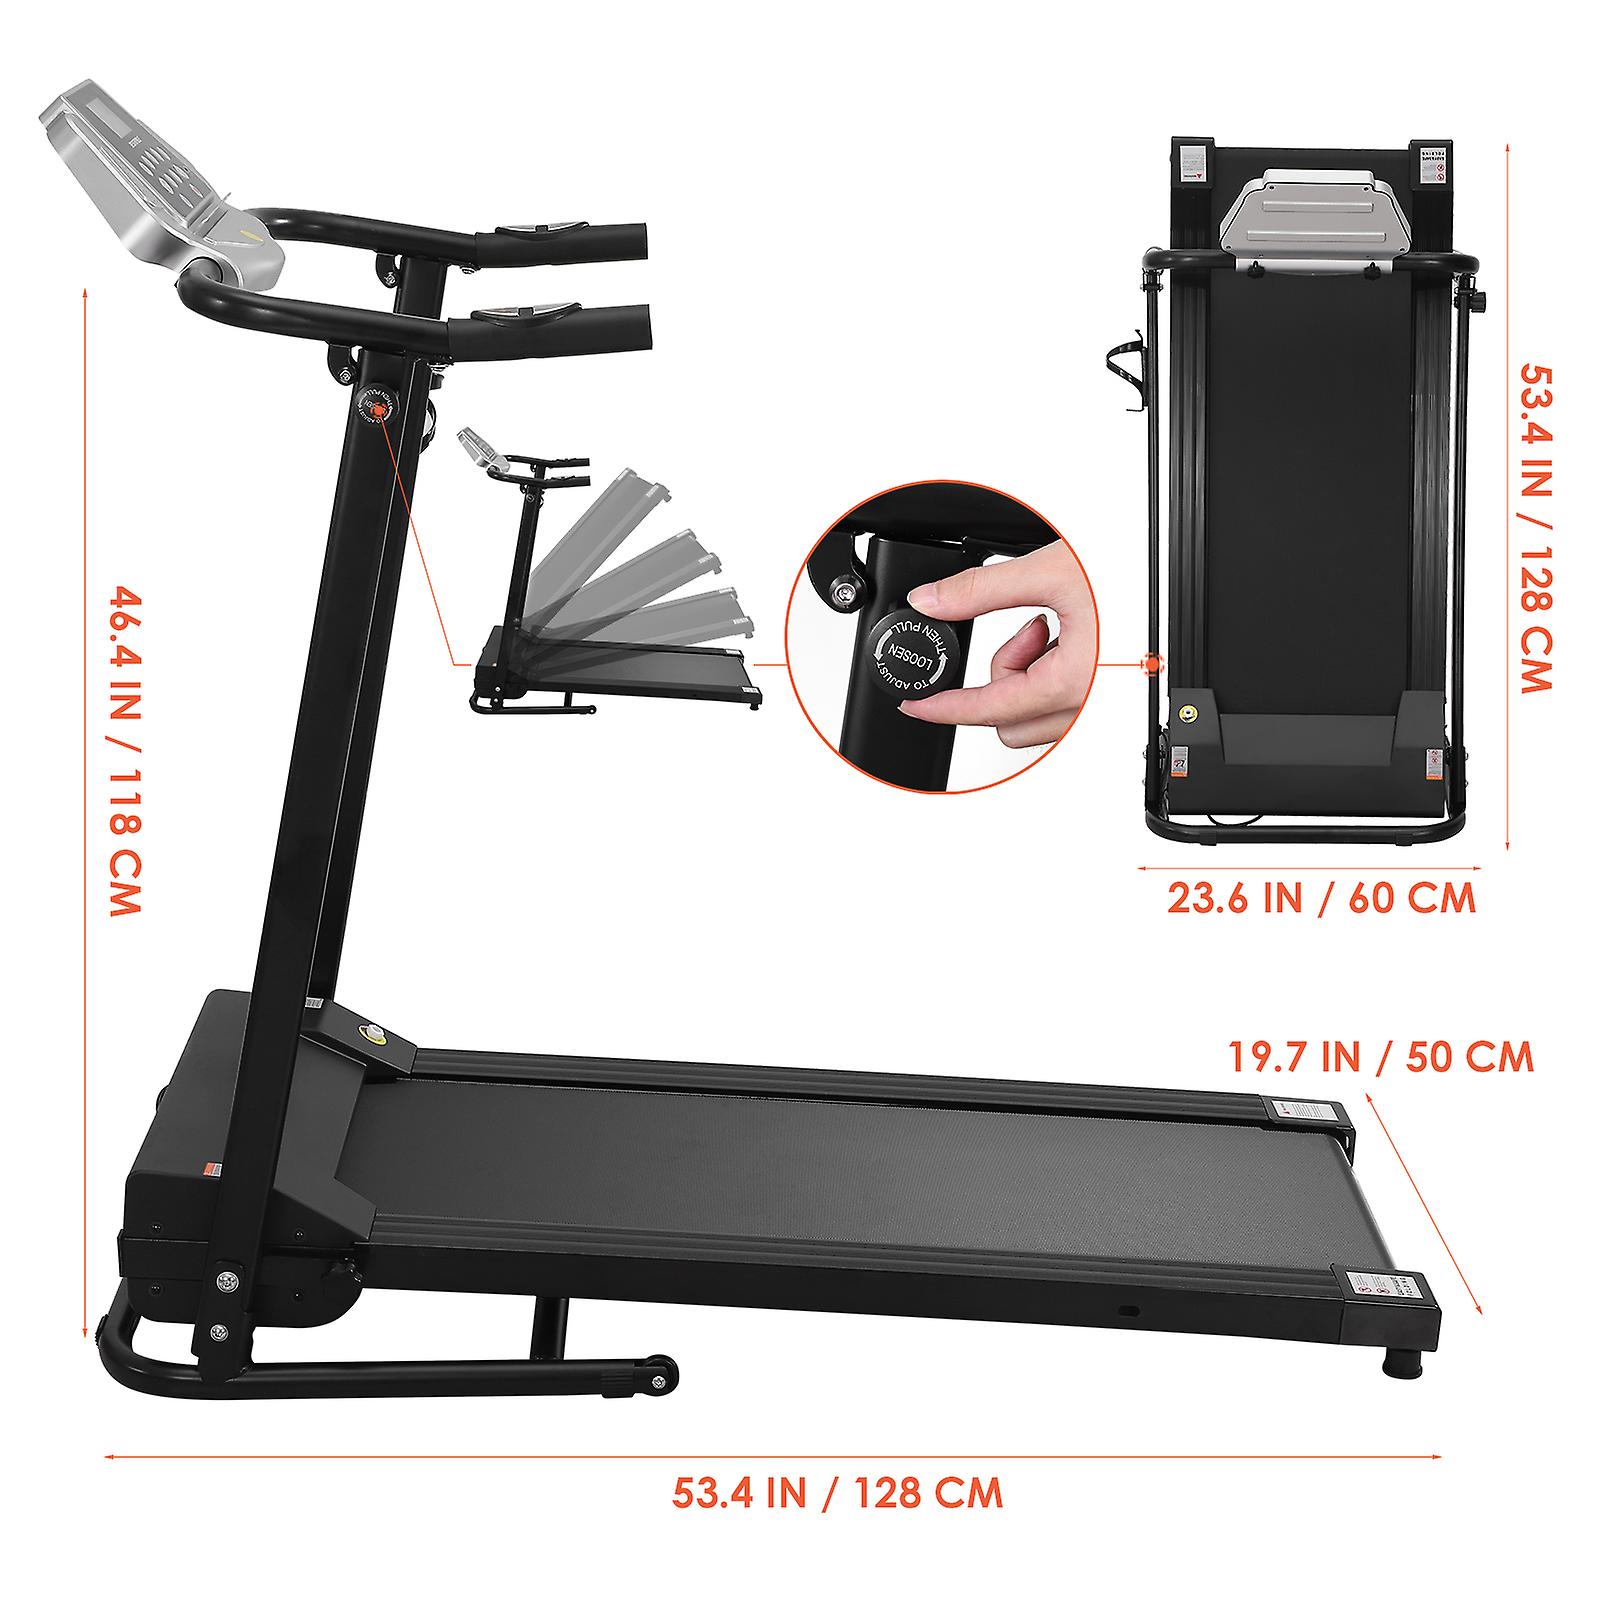 Besportble Motorized Treadmill Portable Electric Treadmill Running Machine Household Folding Treadmill With Lcd Monitor For Home Gym (us Plug)